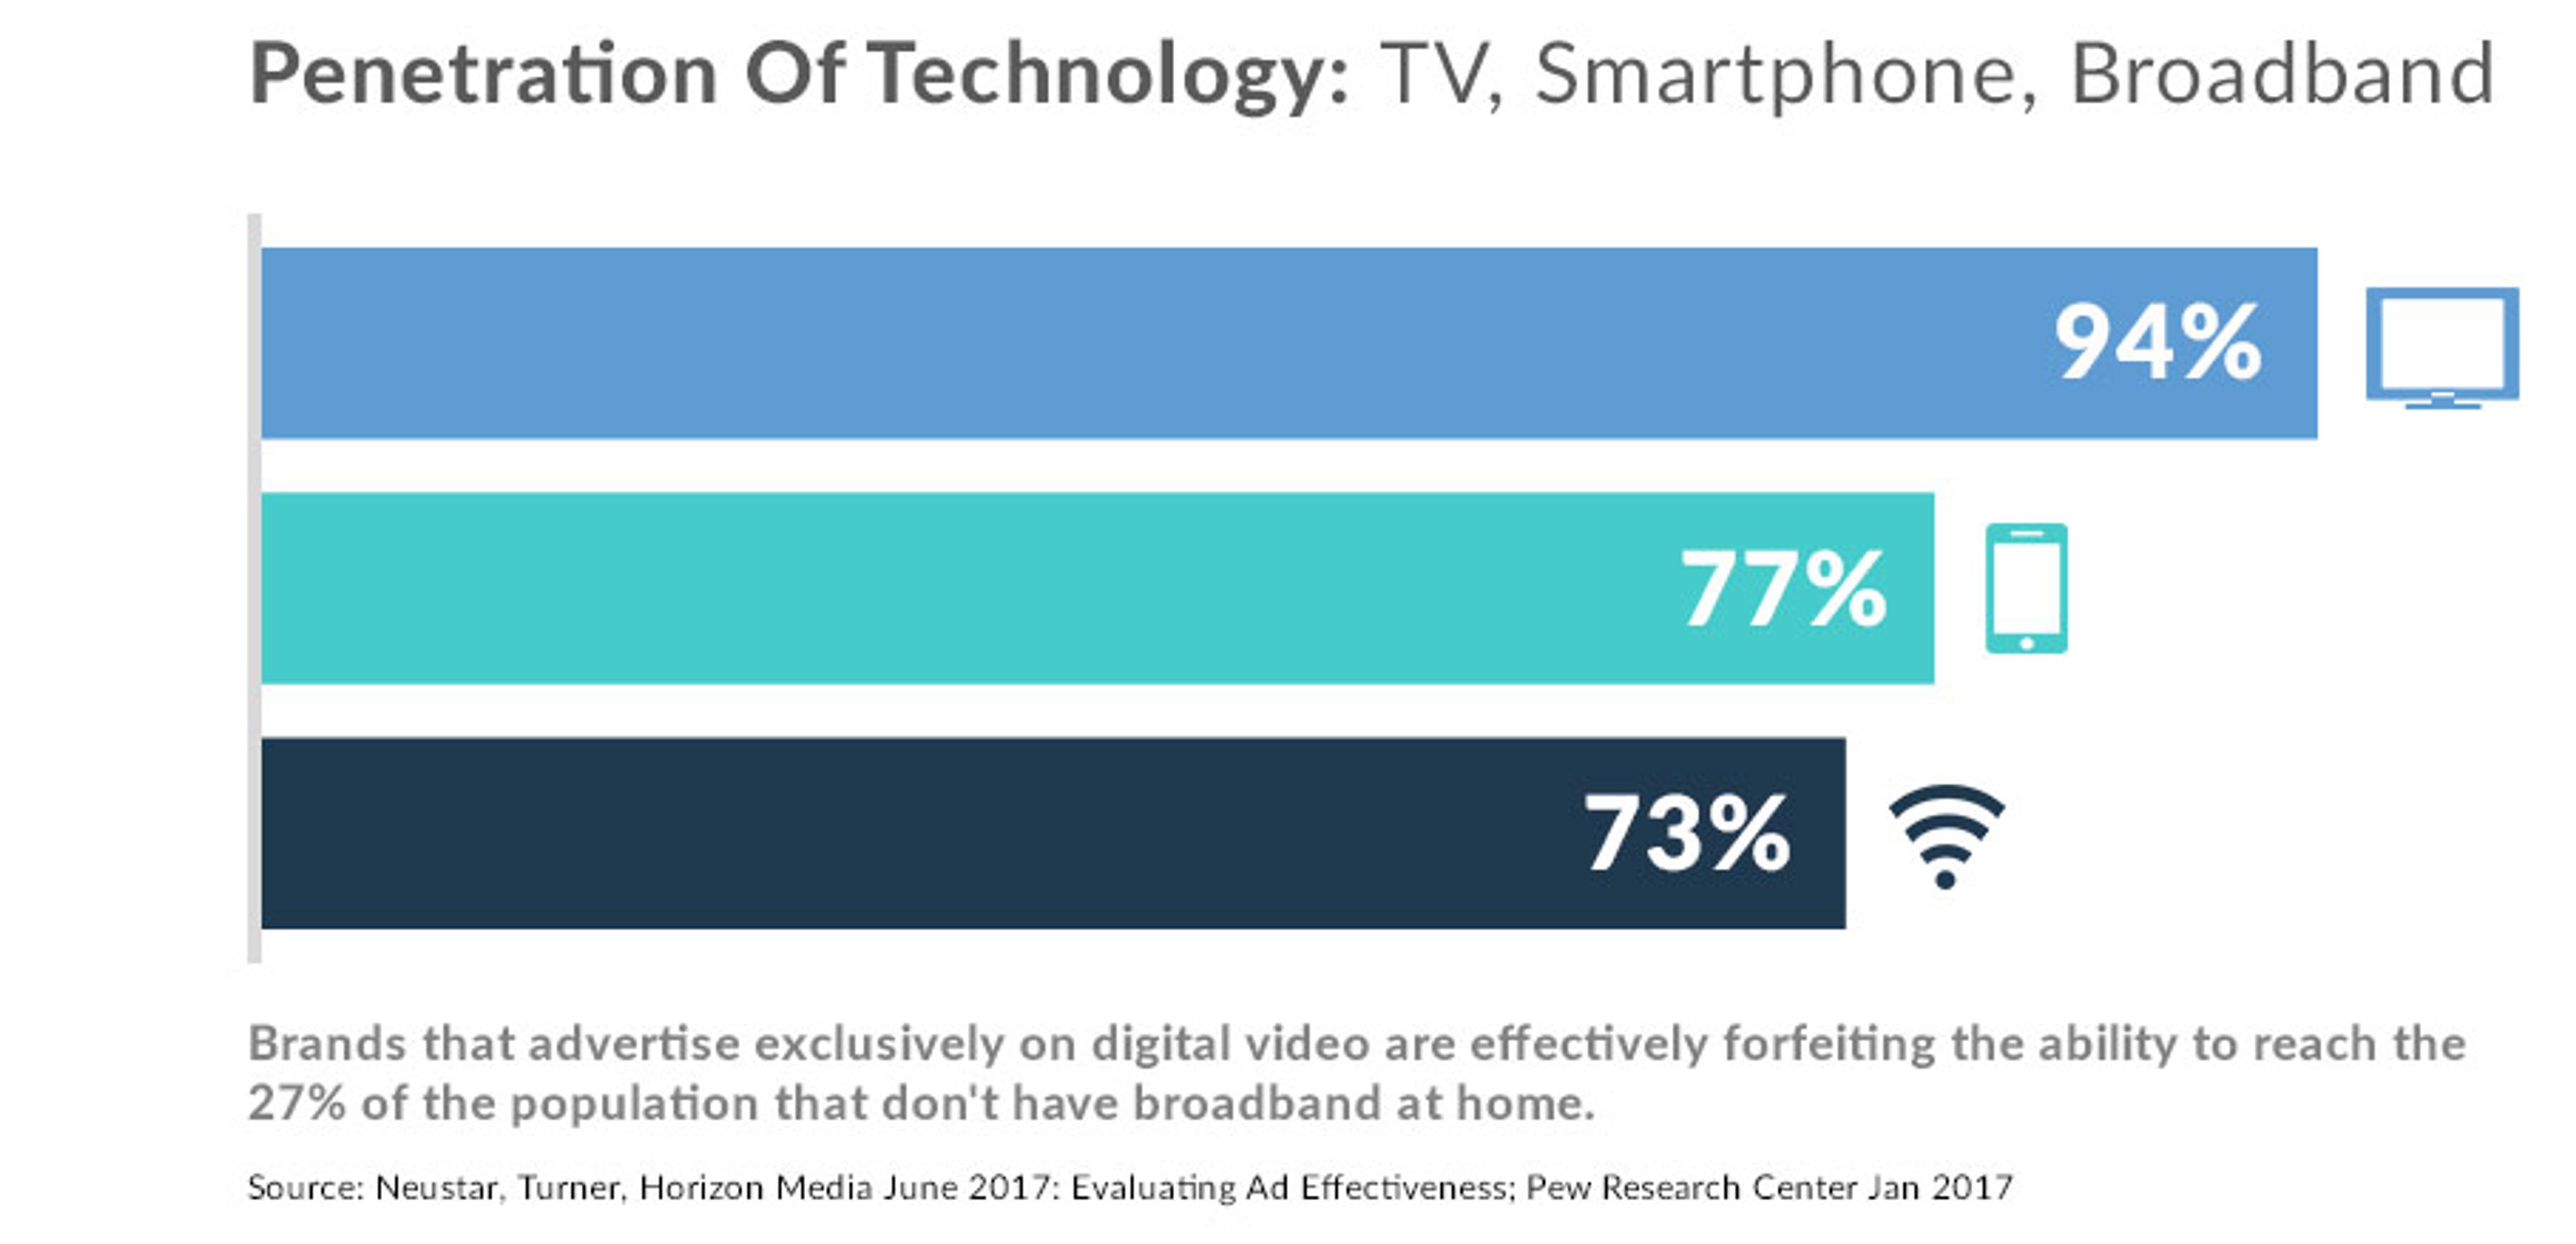 Nearly 25% of Americans don't even have the ability to be reached by digital video advertising